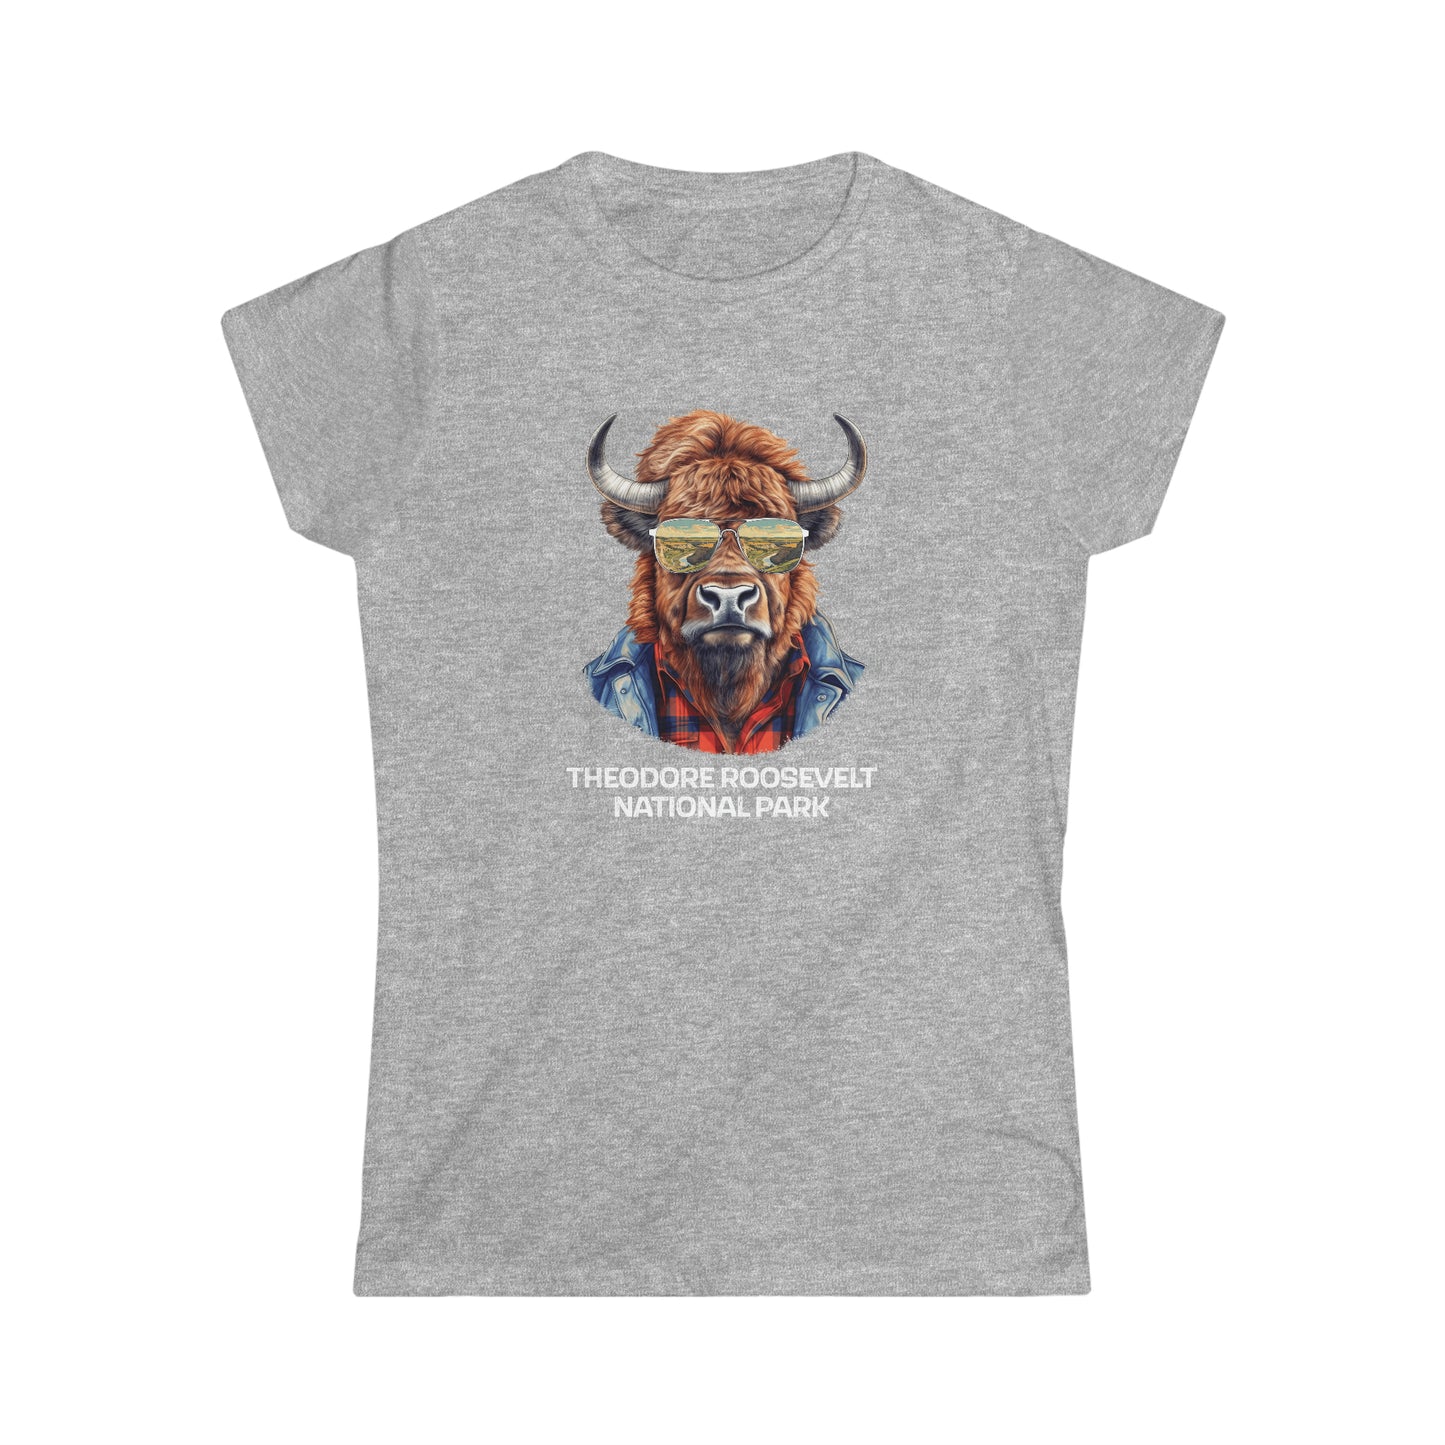 Theodore Roosevelt National Park Women's T-Shirt - Cool Bison